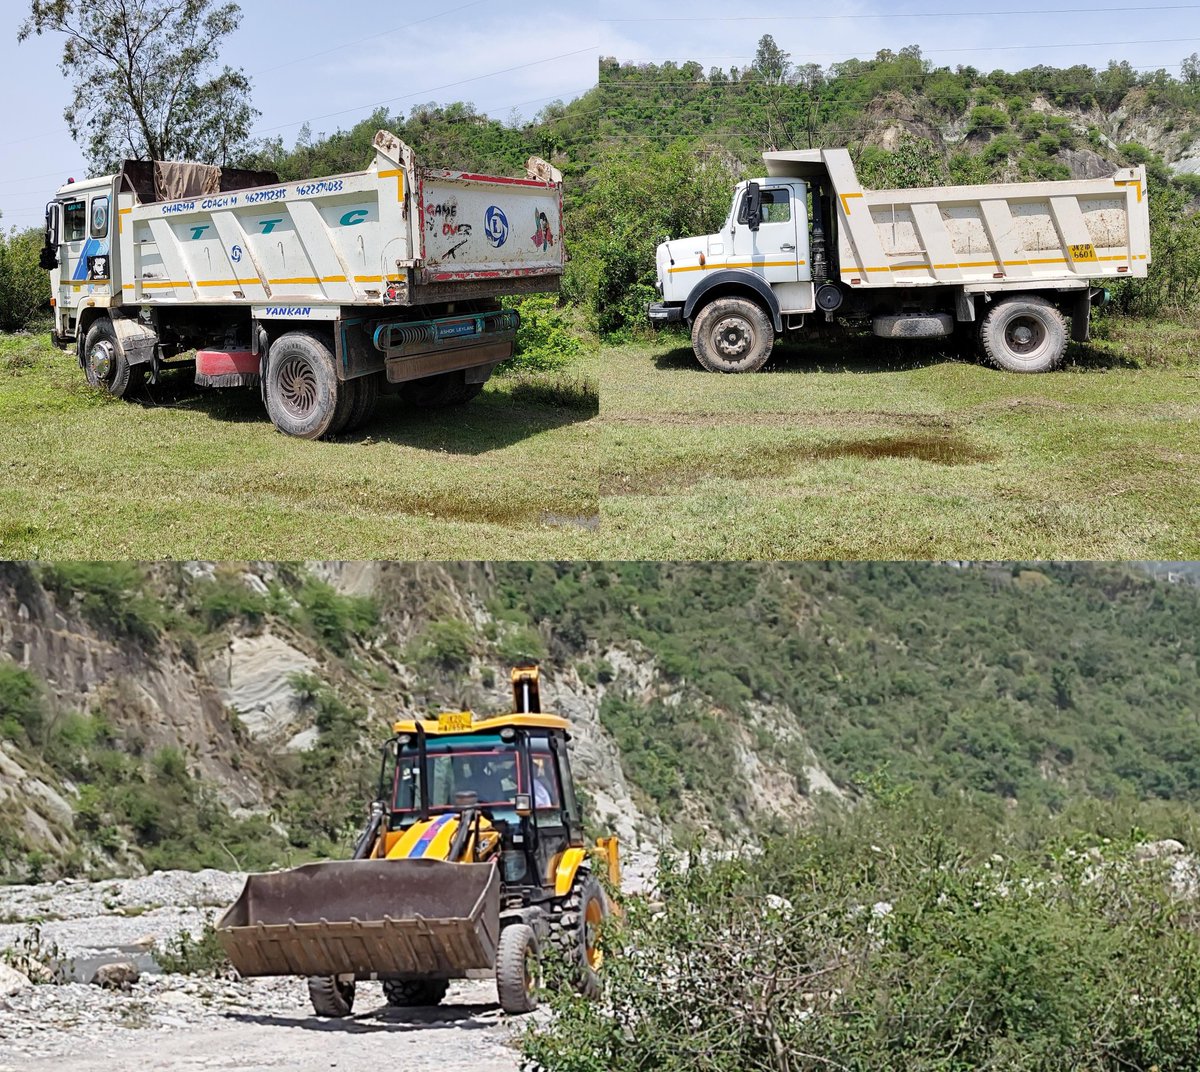 Under the guidance of DM Reasi, @vishesh_jk, Mining Dept. took a tough stance against illegal mining to prevent unauthorized excavation of mineral resources. 01 excavator & 05 dumpers seized at Anji Nallah. @OfficeOfLGJandK @diprjk @GeologyMiningJK